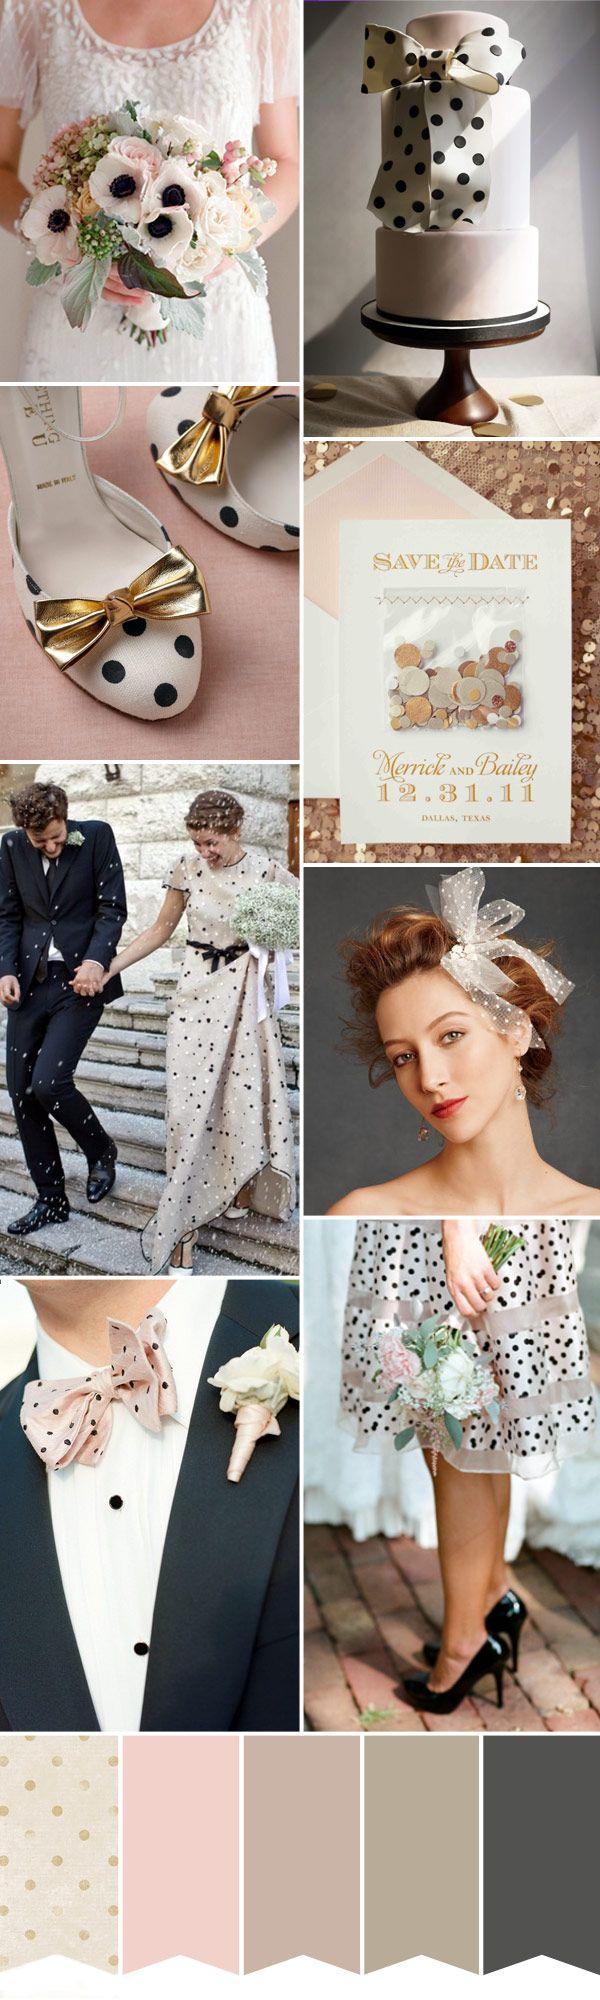 Wedding - Inspired By A Polka Dot Wedding - Blush, Gold And Grey Palette